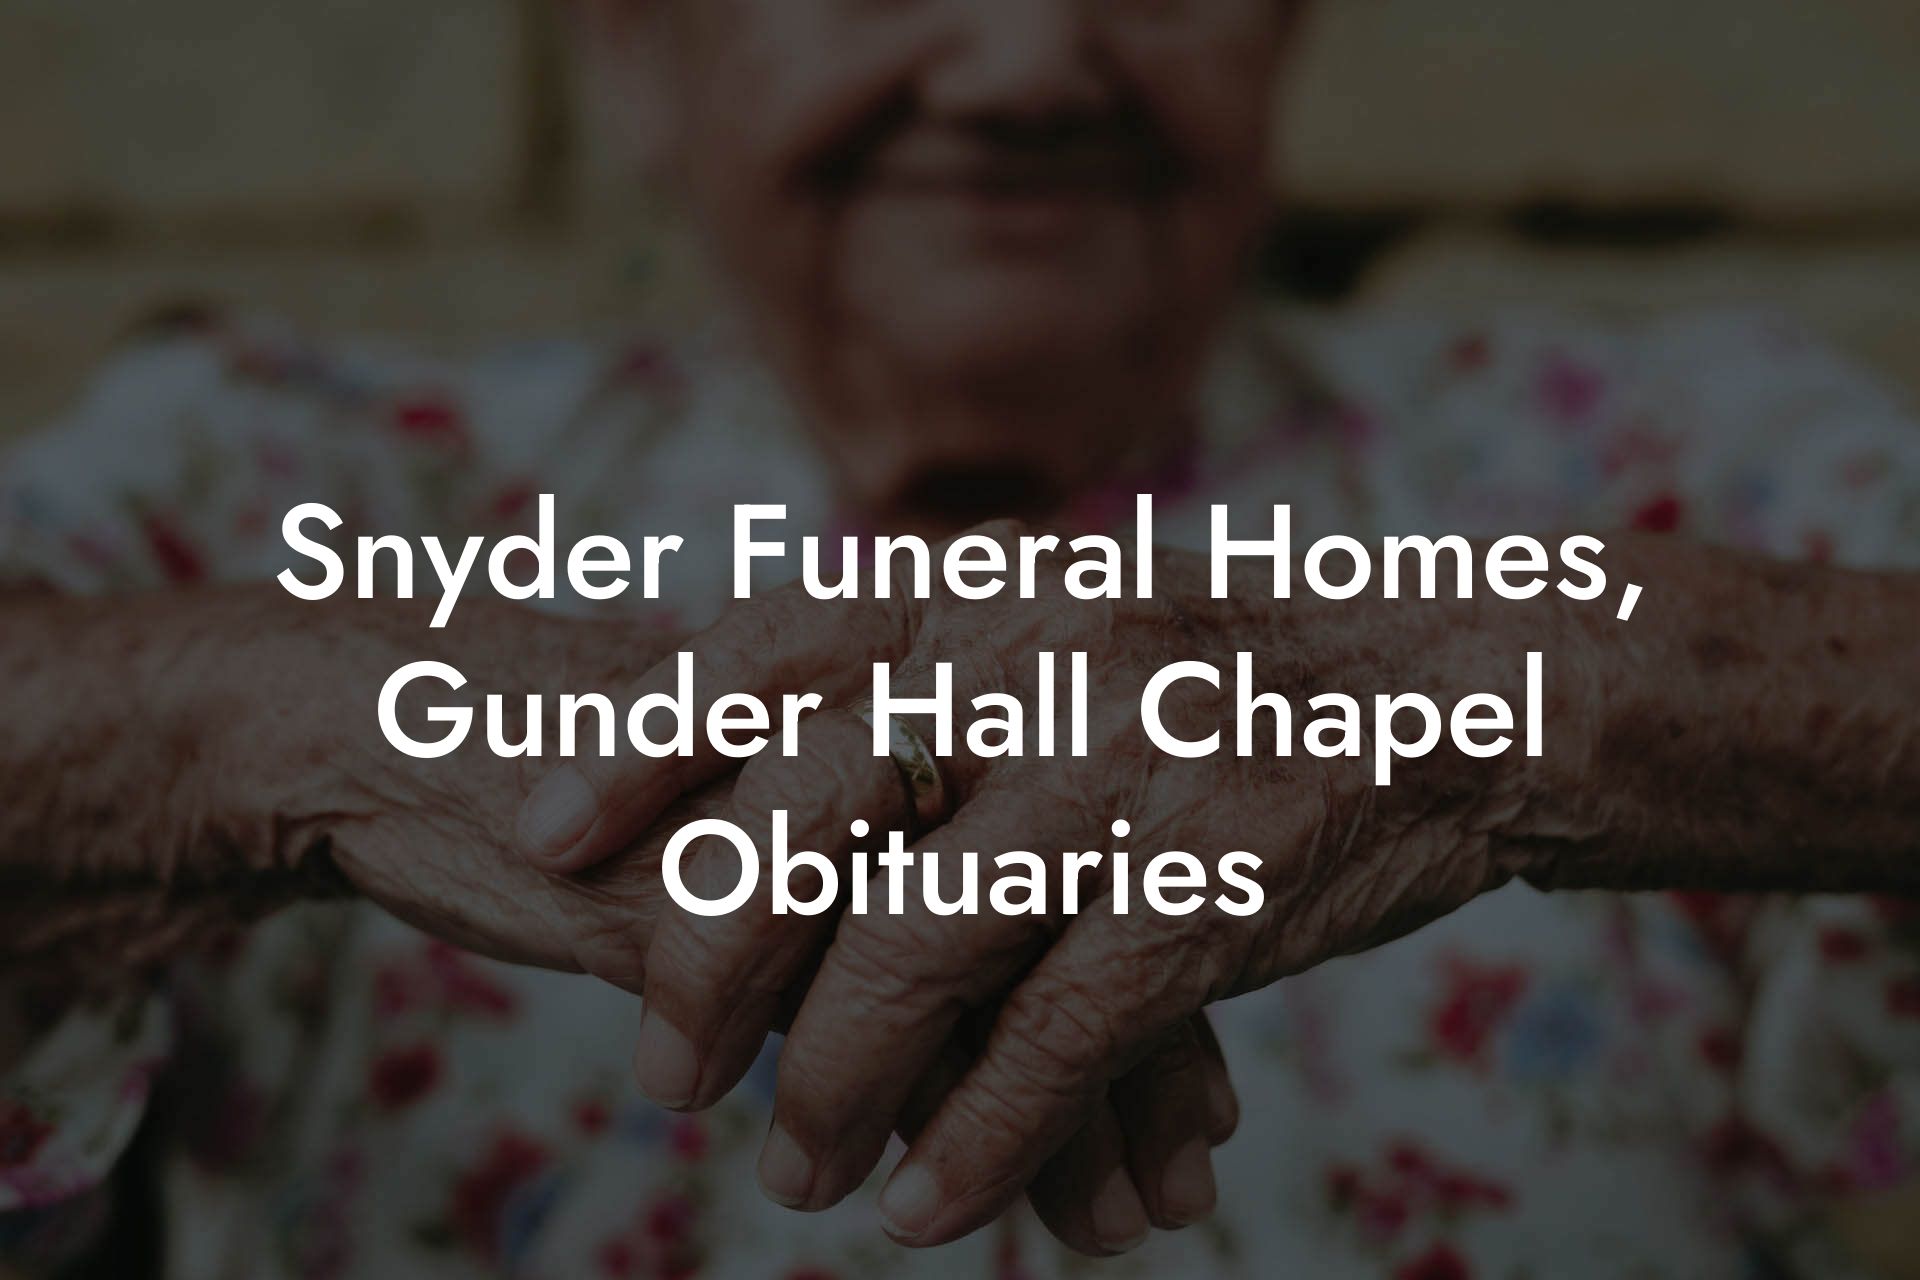 Snyder Funeral Homes, Gunder Hall Chapel Obituaries